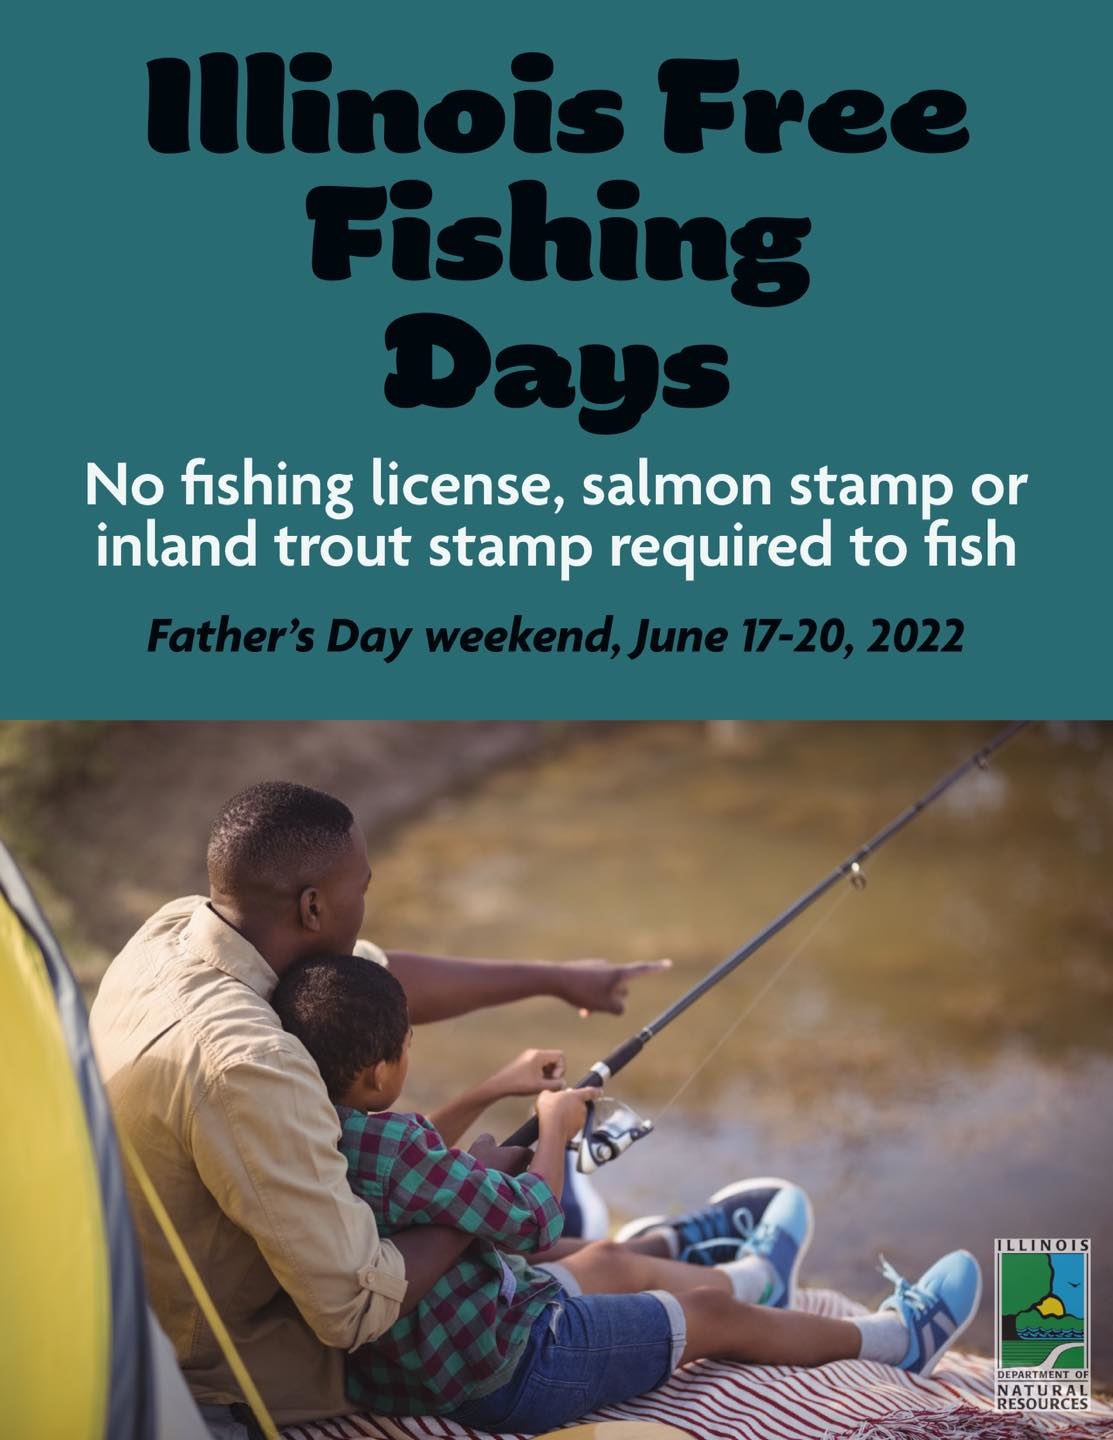 DNR free fishing days this weekend